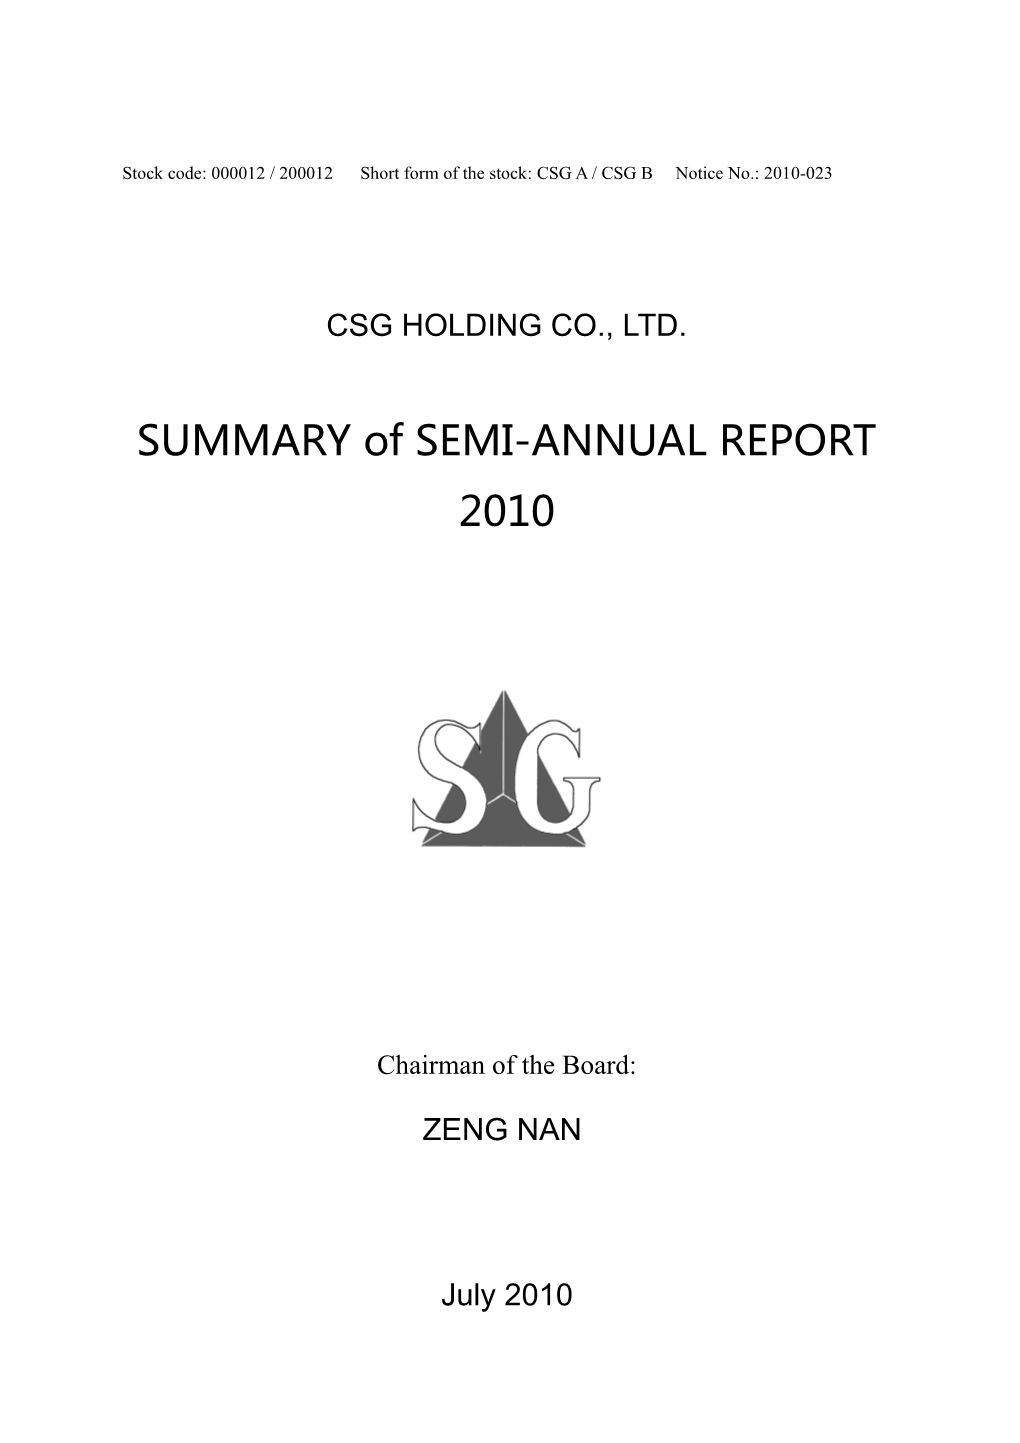 Stock Code: 000012 / 200012 Short Form of the Stock: CSG a / CSG B Notice No.: 2010-023